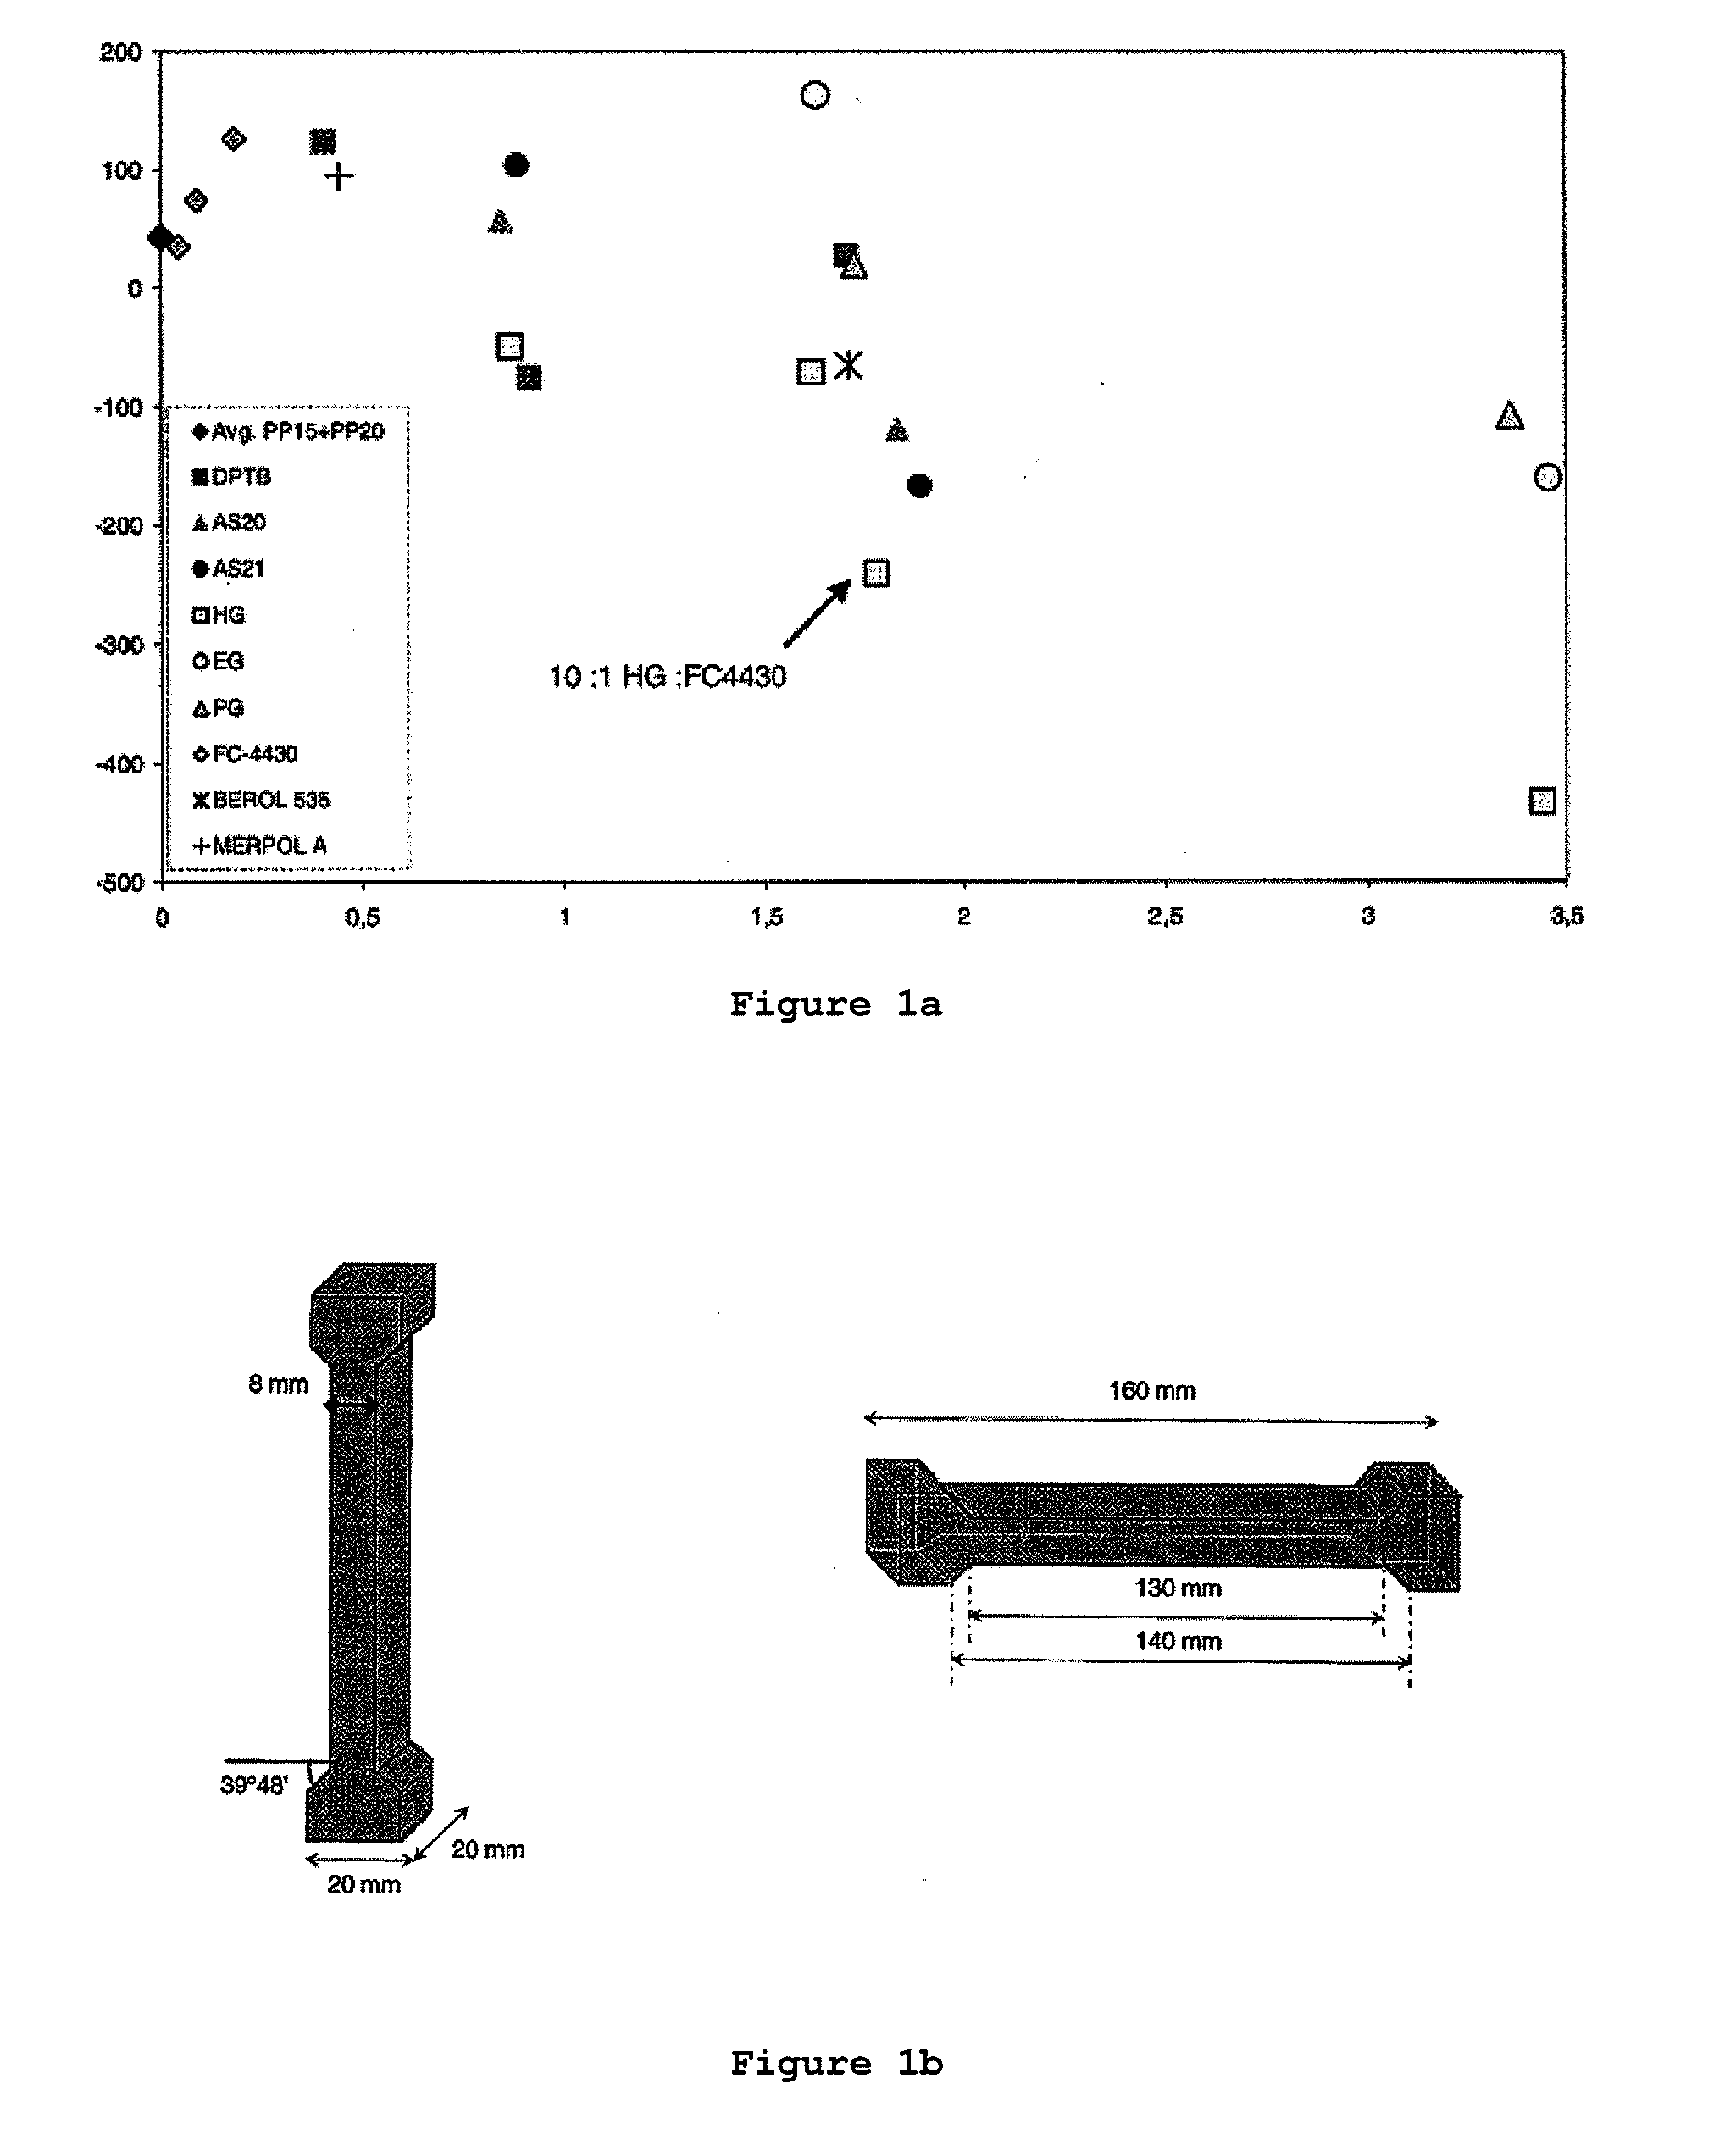 Cement shrinkage reducing agent and method for obtaining cement based articles having reduced shrinkage